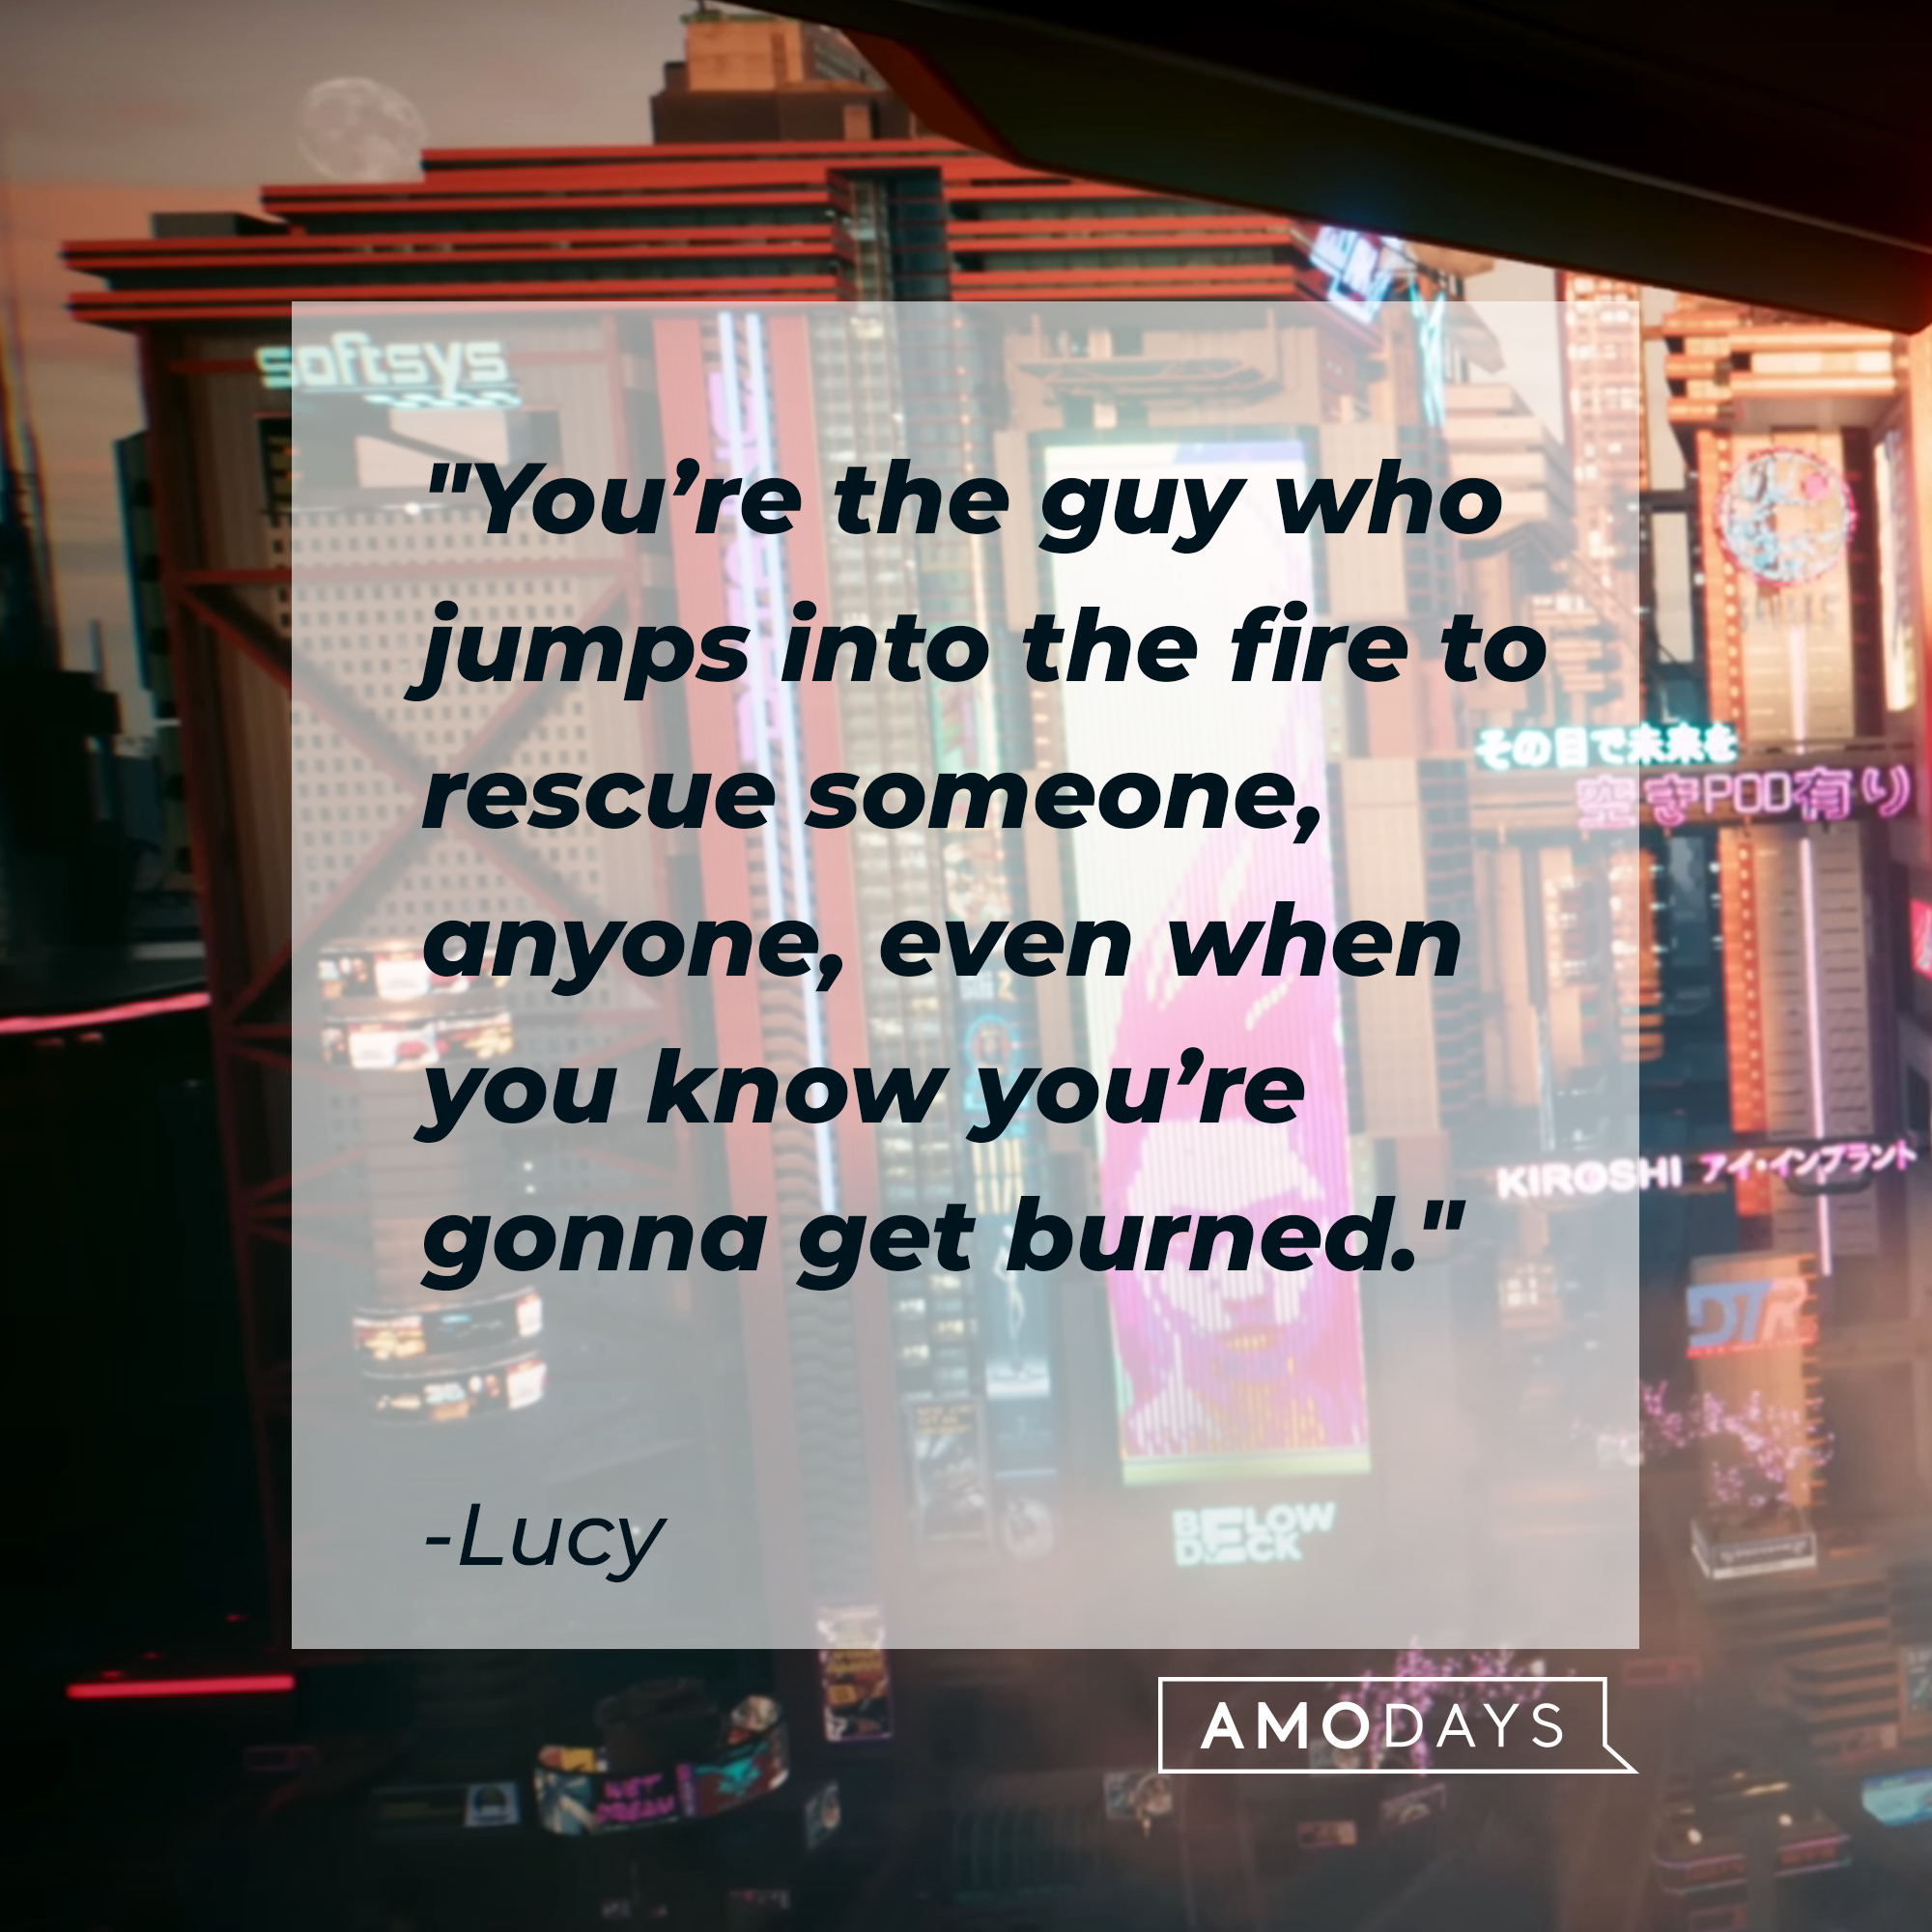 Lucy’s quote: "You’re the guy who jumps into the fire to rescue someone, anyone, even when you know you’re gonna get burned.” | Source: Youtube.com/CyberpunkGame